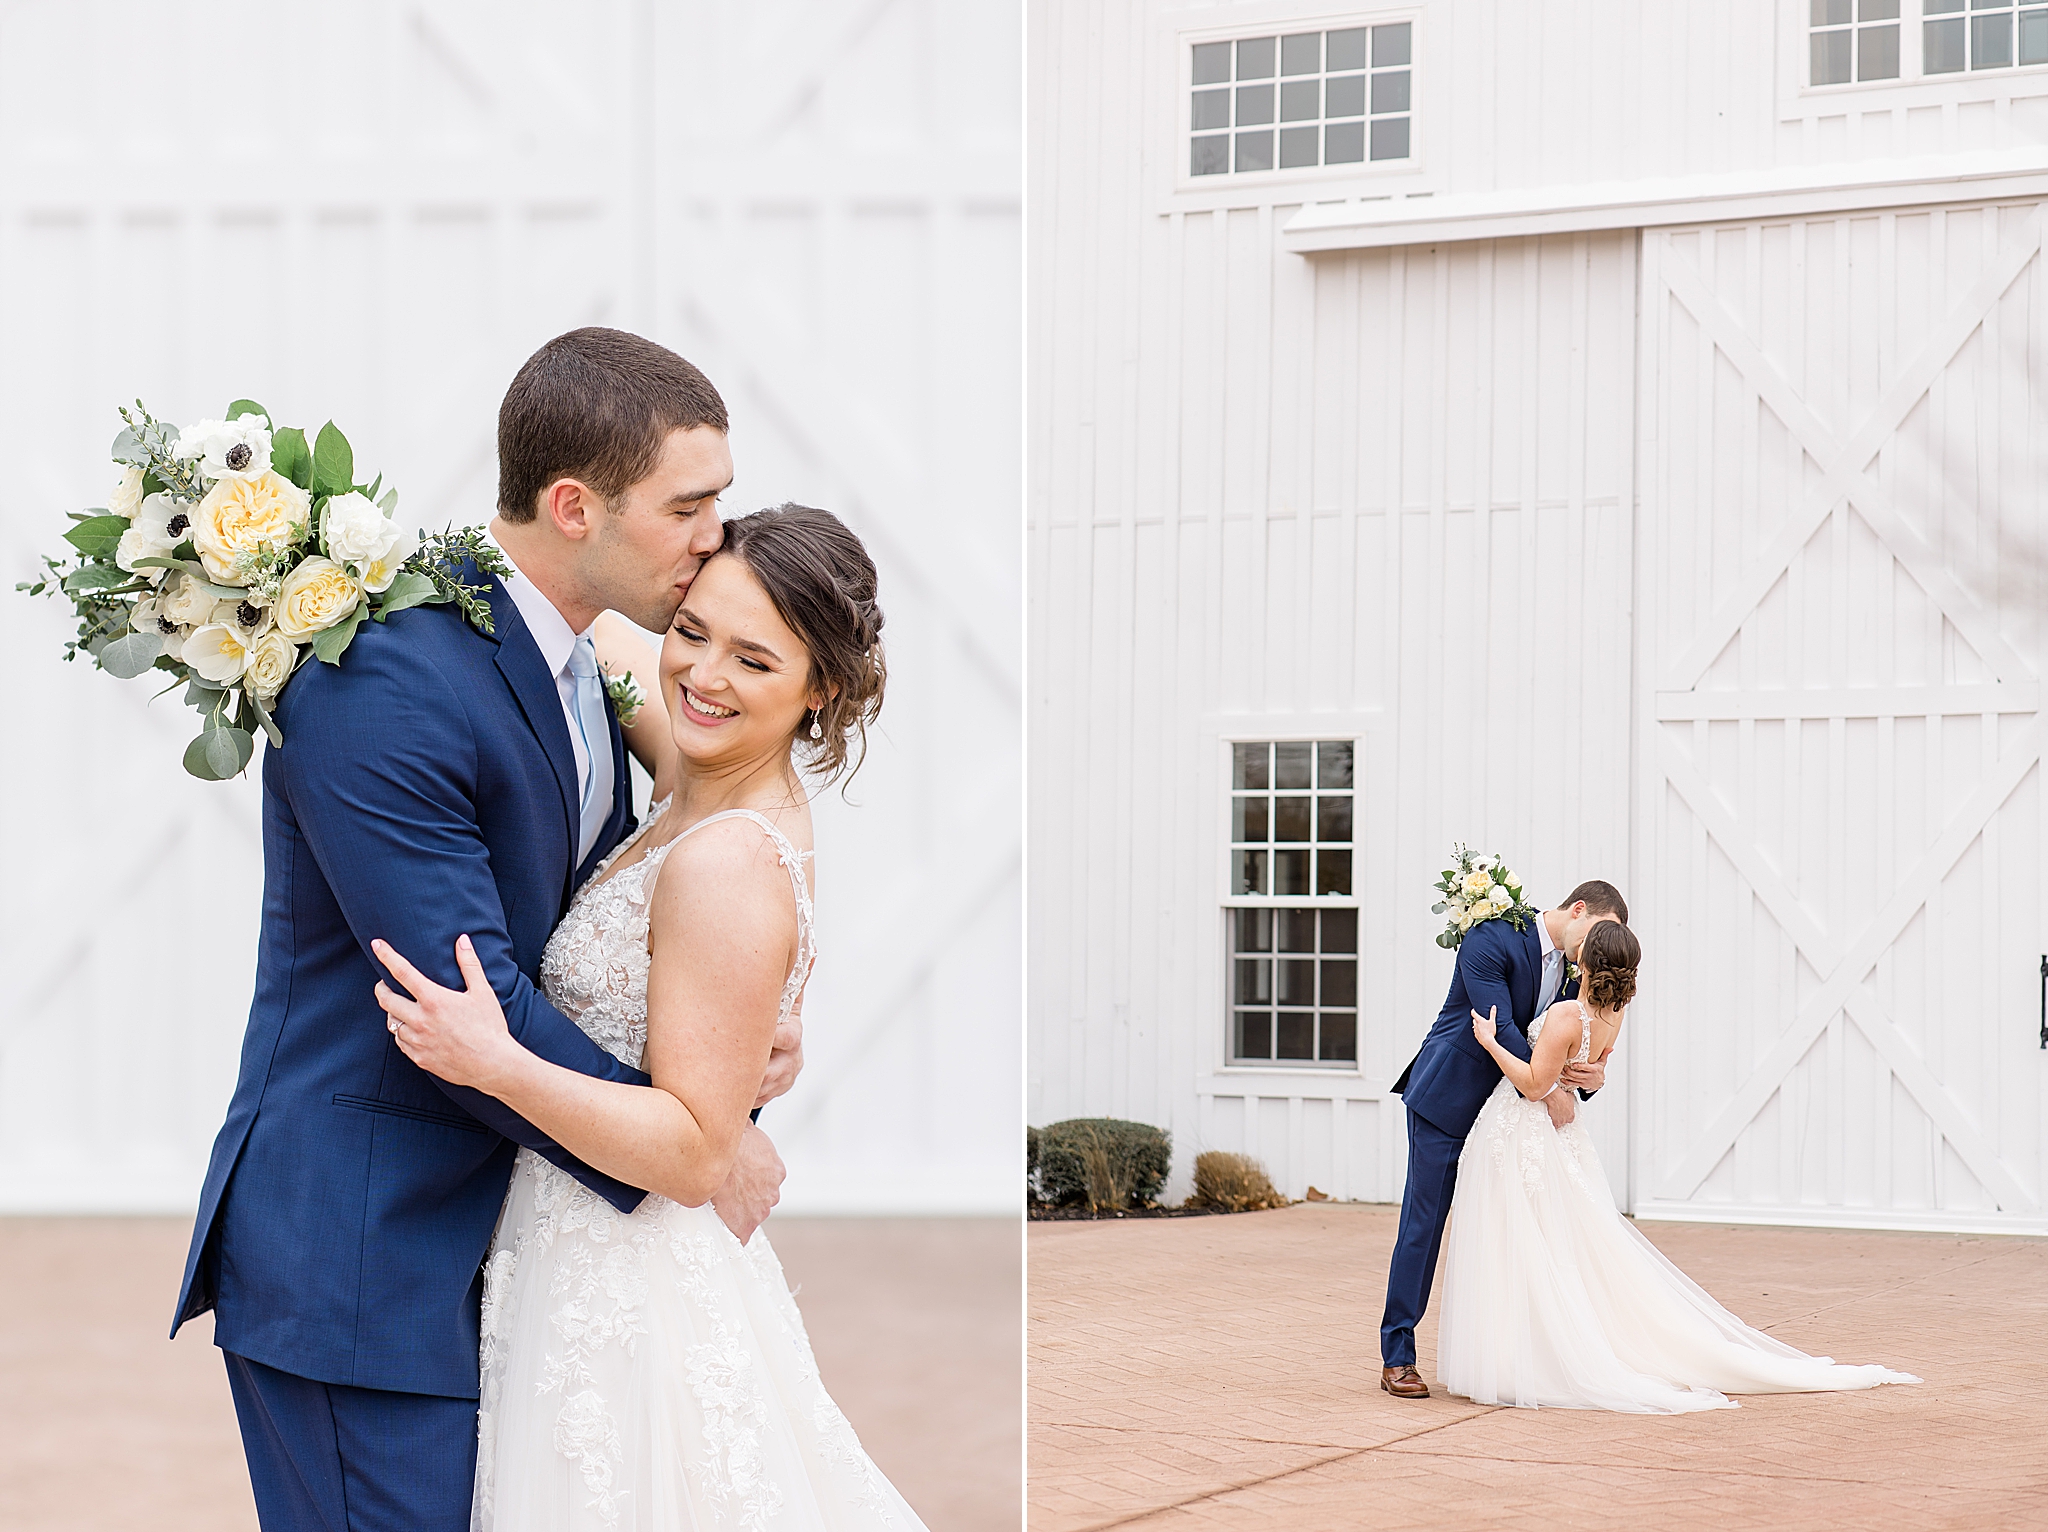 romantic winter wedding portraits at The White Sparrow